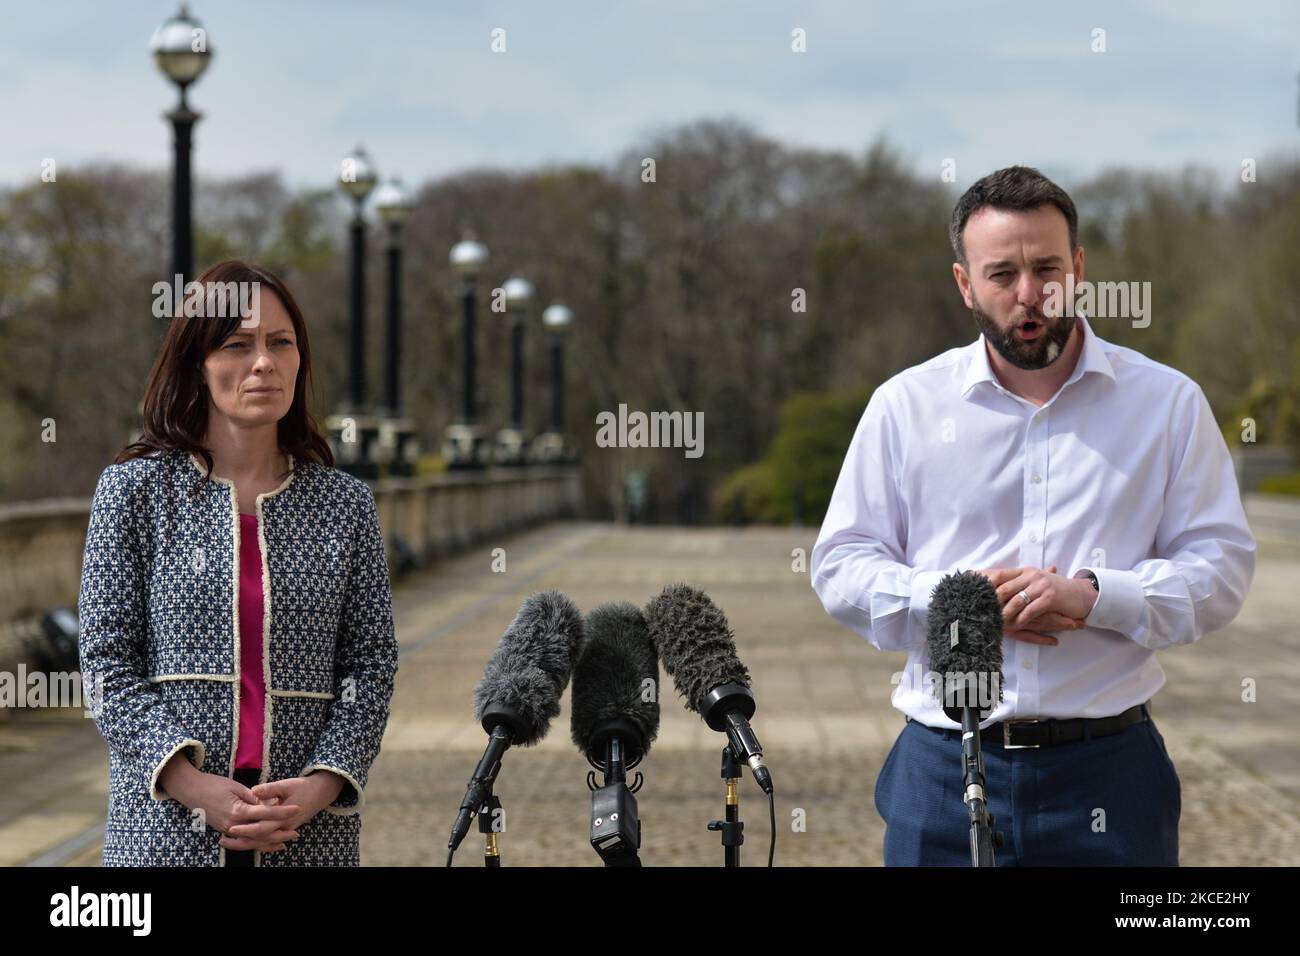 Social Democratic and Labour Party (SDLP) leader Colum Eastwood (R) speaks outside Stormont in Belfast, following a loyalist protest in the city against Brexit's Northern Ireland Protocol. On Monday, April 19, 2021, in Belfast, Northern Ireland (Photo by Artur Widak/NurPhoto) Stock Photo